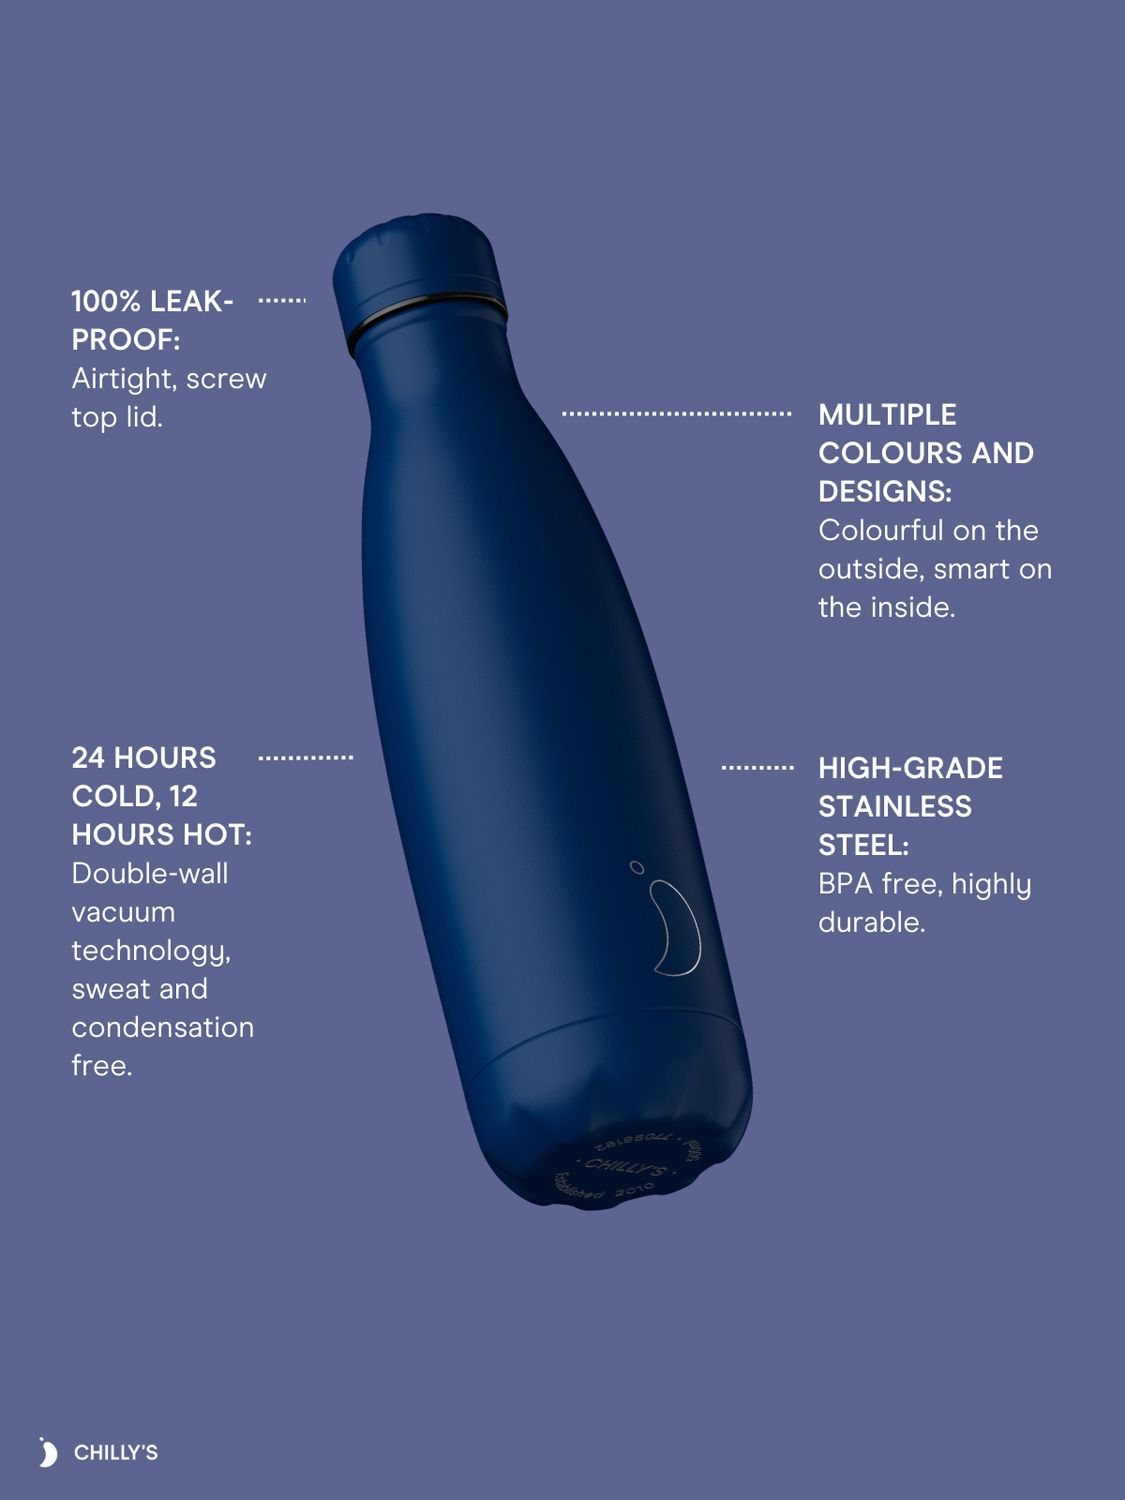 Chilly's Original Water Bottle Stainless Steel & Reusable Leak Proof